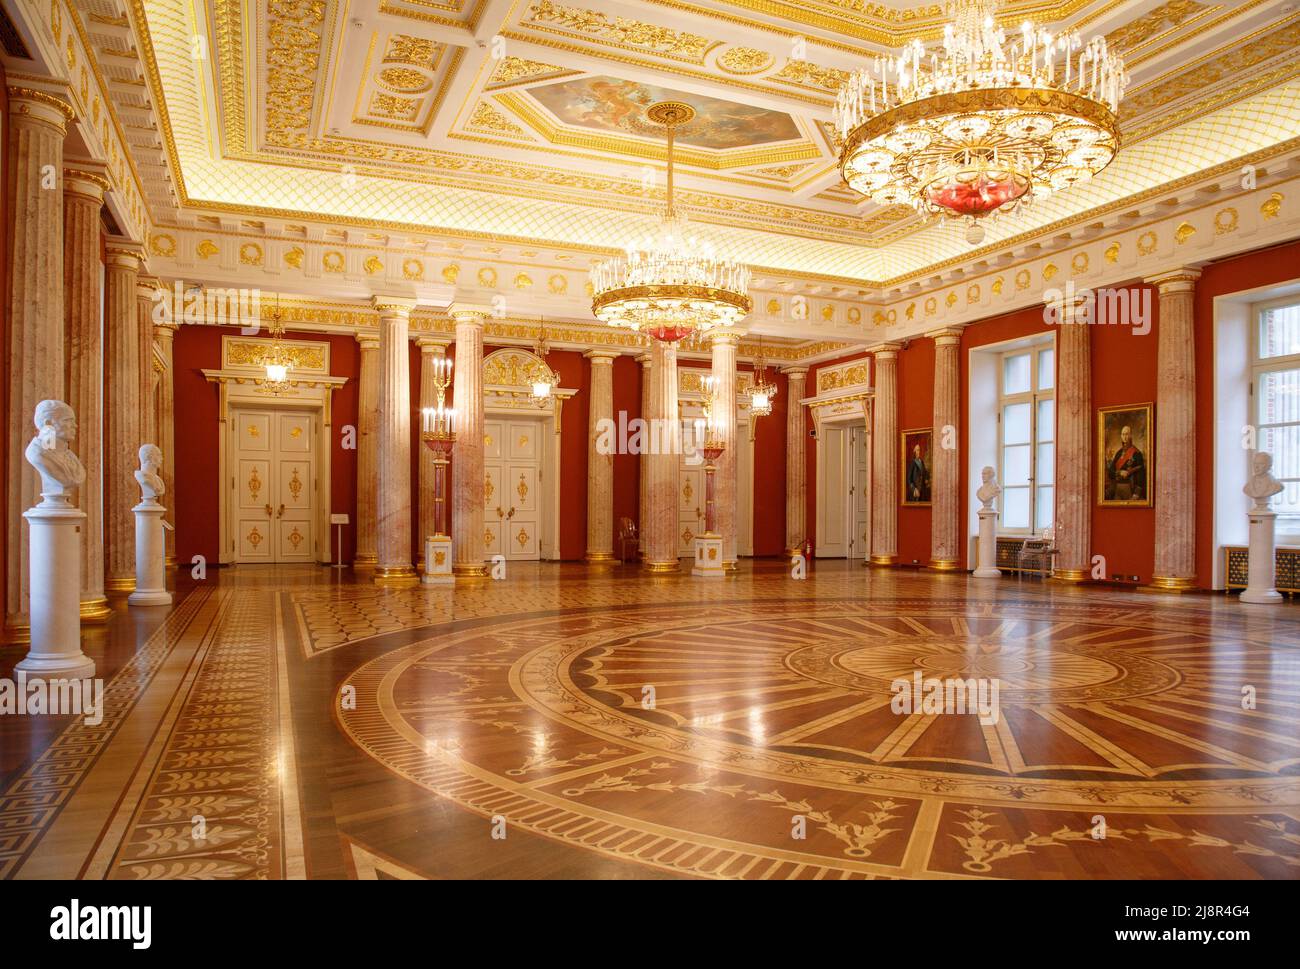 Moscow, Russia, 23 October 2019: Tavrichesky hall interior in State historical and architectural museum reserve Tsaritsyno, Russia. Tauride hall Stock Photo